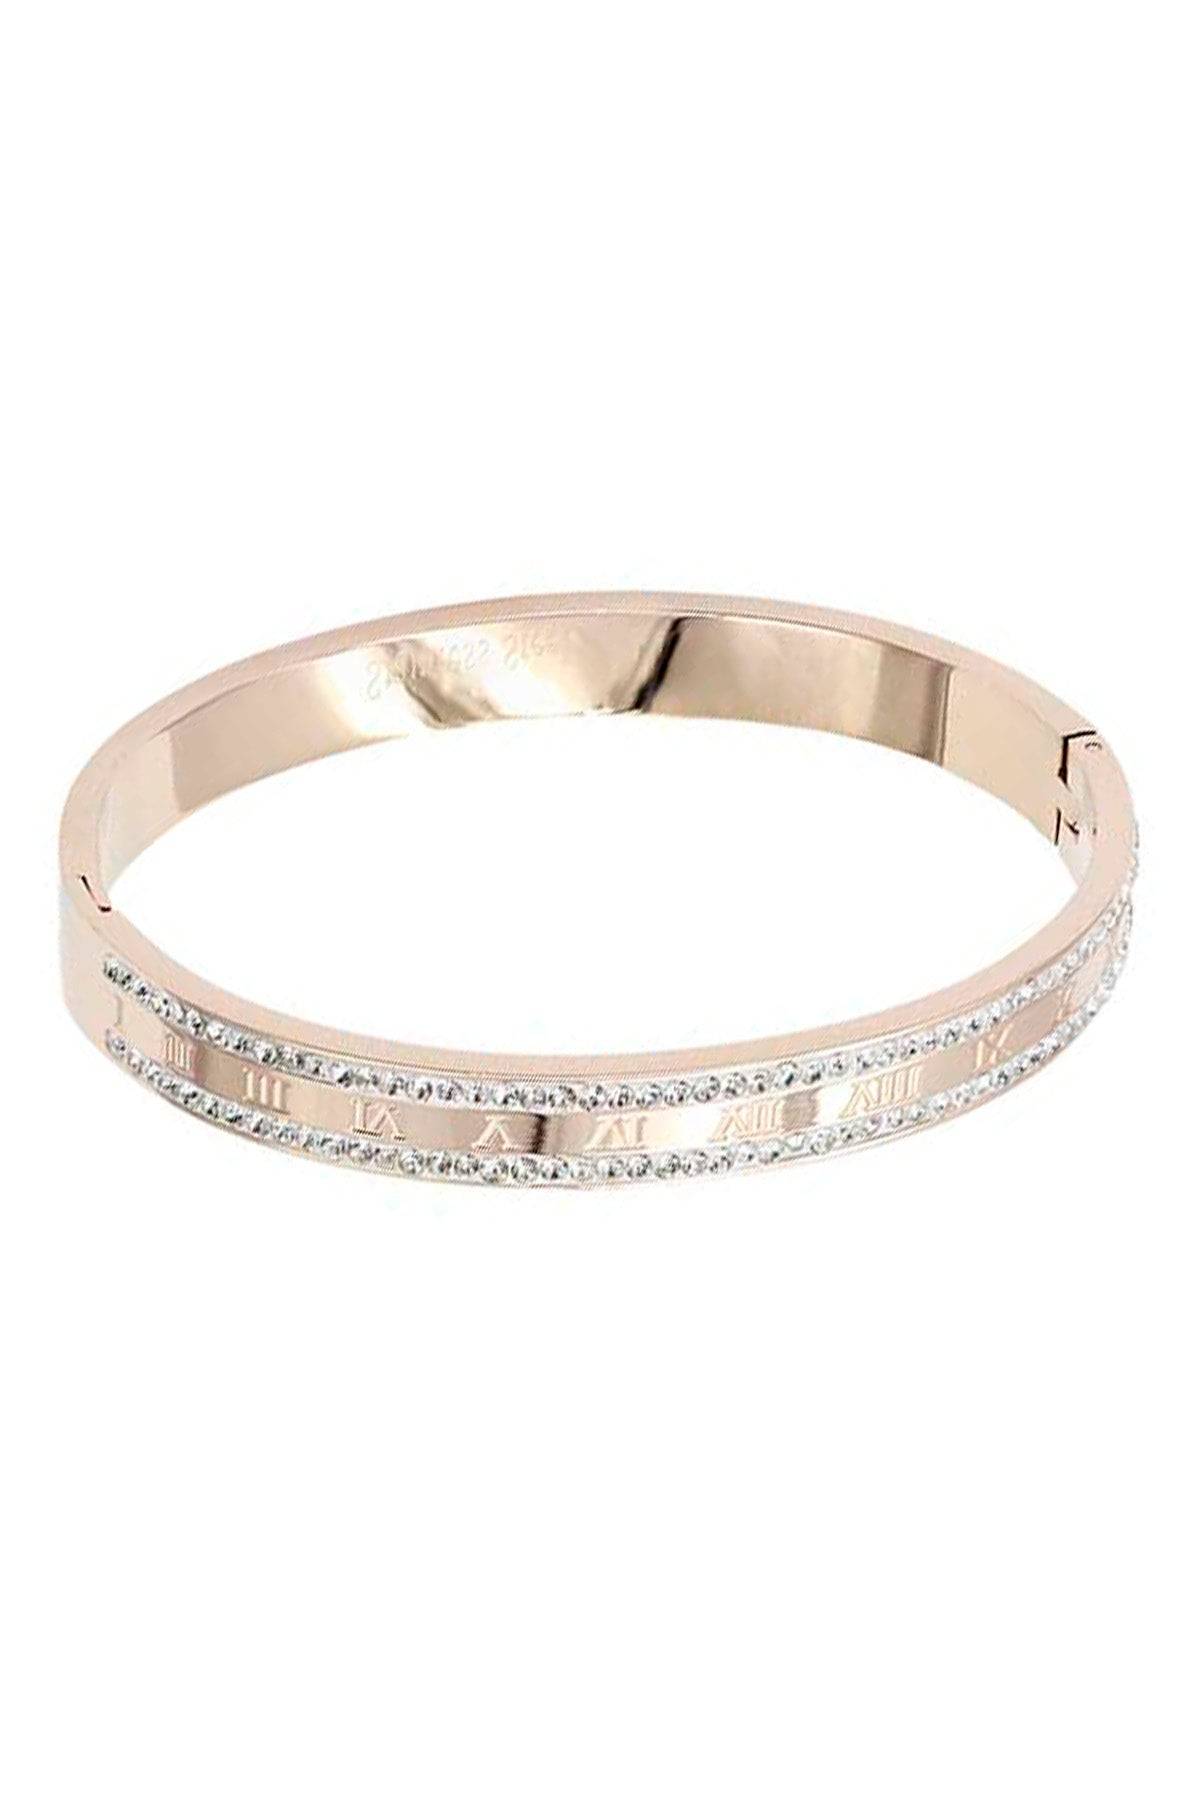 Roman Numerals Crystal Edge Metal Bangle - Veronica Luxe-jewelry